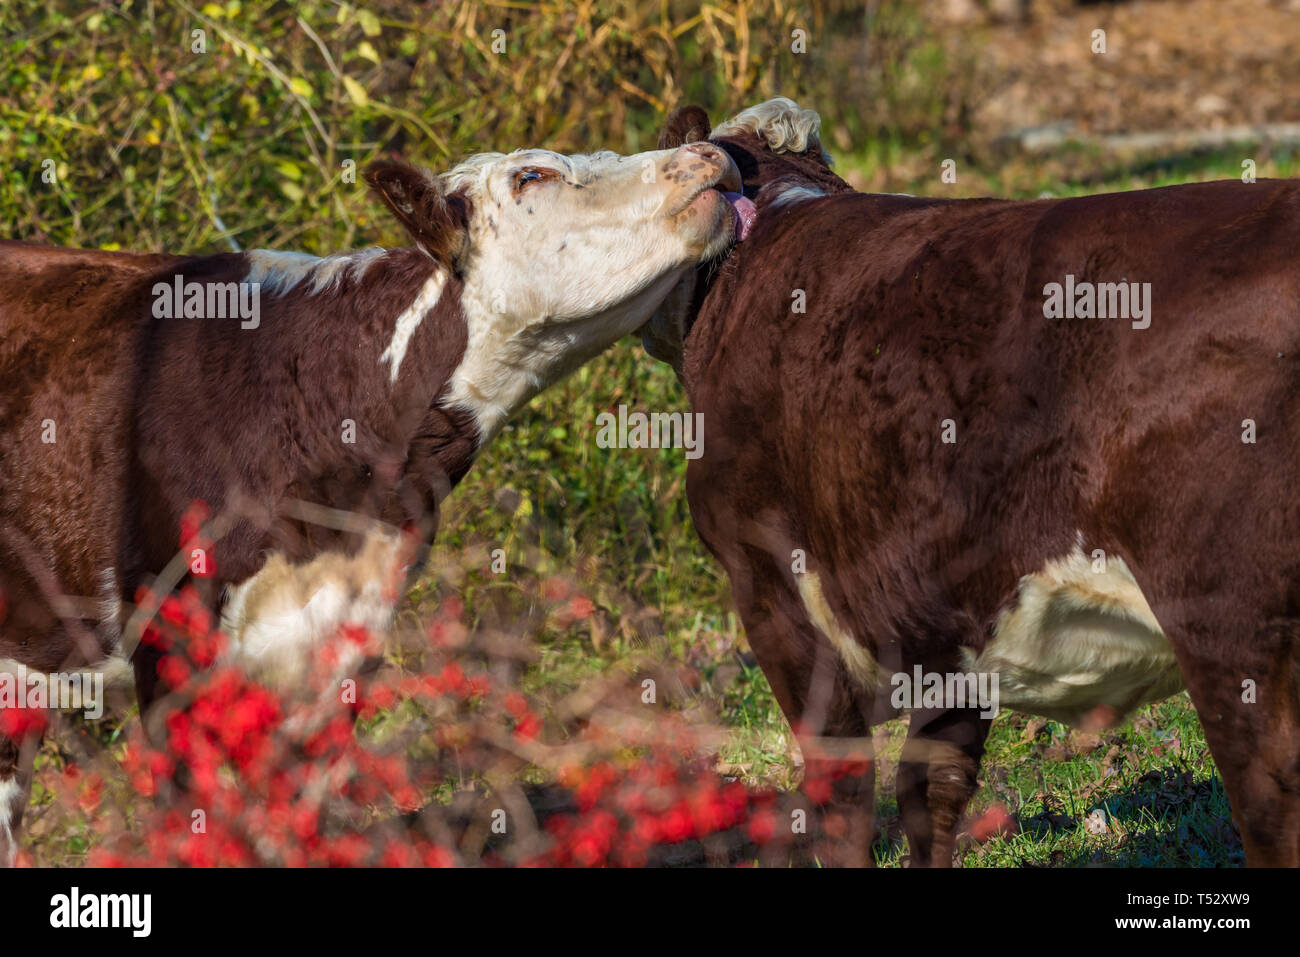 Cow licking friend in woods on an organic farm on an autumn day Stock Photo